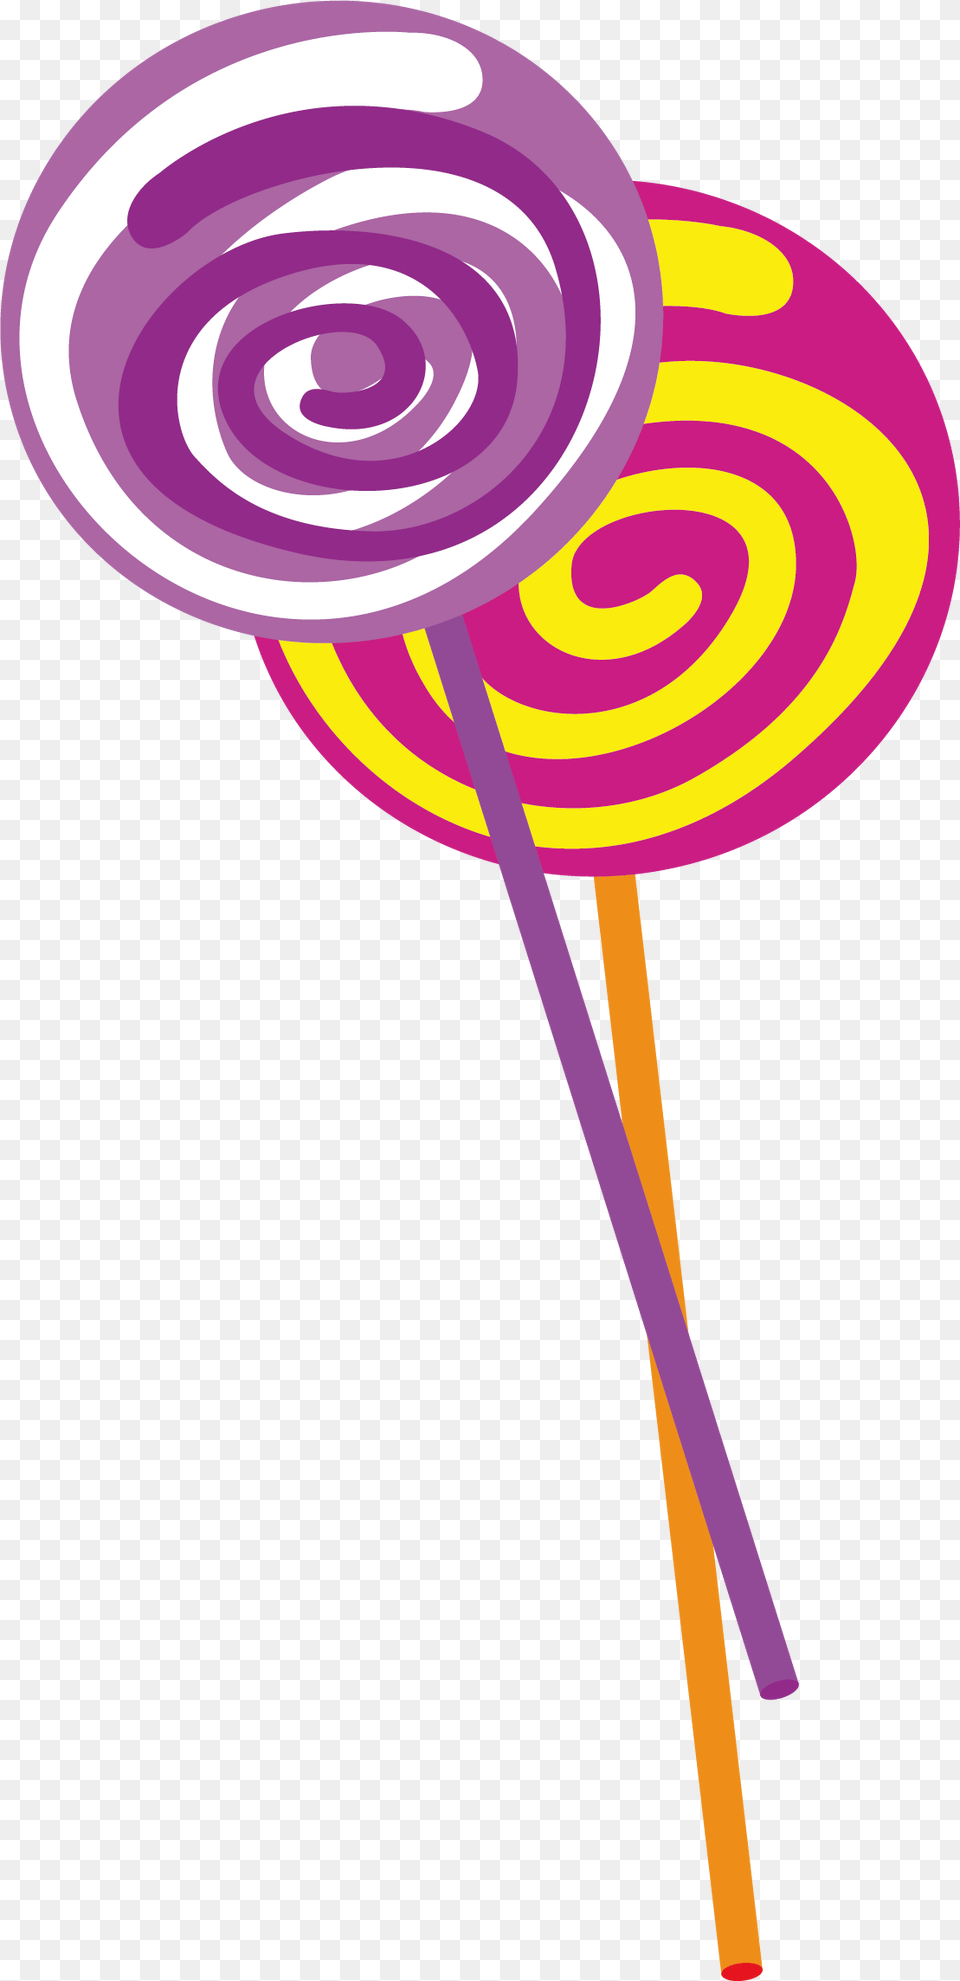 Purple Candy On White Background Royalty Cliparts Vector, Food, Lollipop, Sweets, Smoke Pipe Png Image